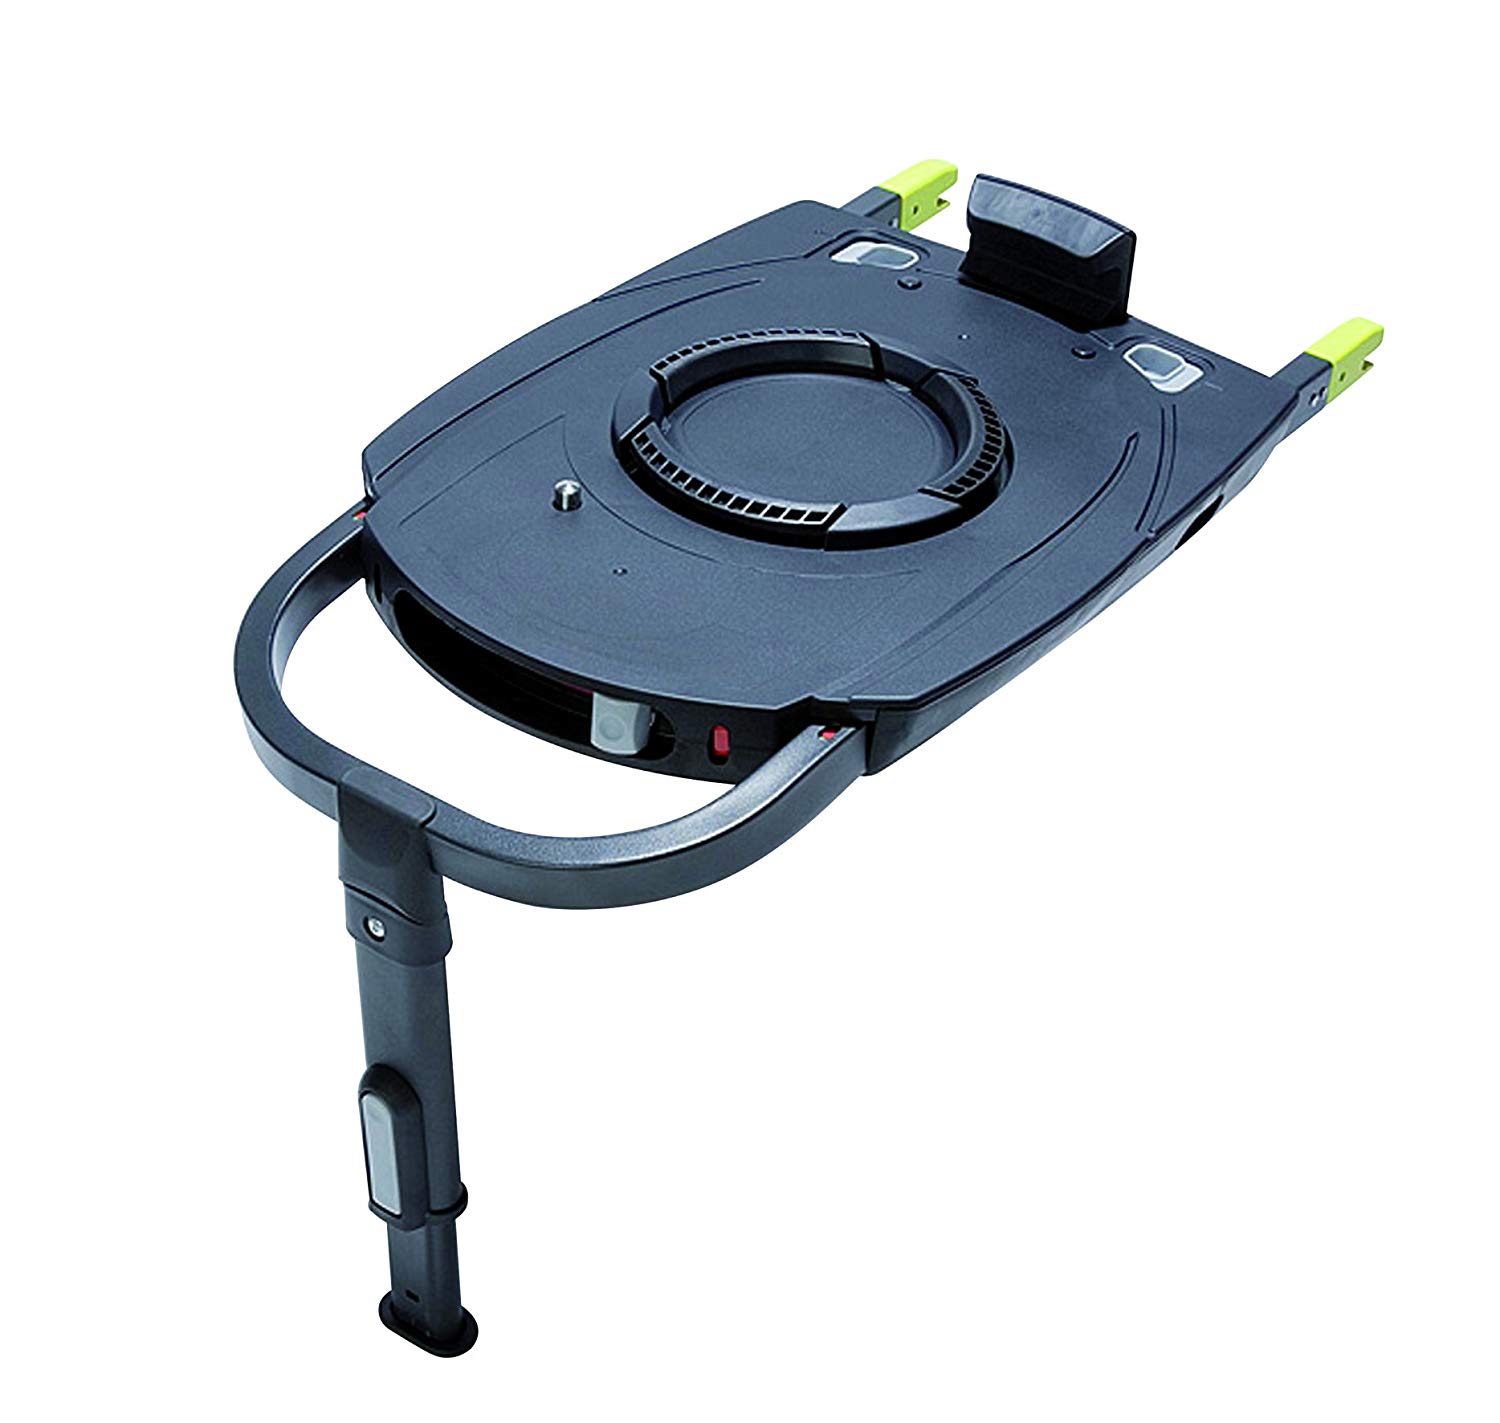 Osann Isofix Base for Migo Sirius Satellite Saturn, Black, Group 0, Group 1 for Models and a Isofix Group 2-3